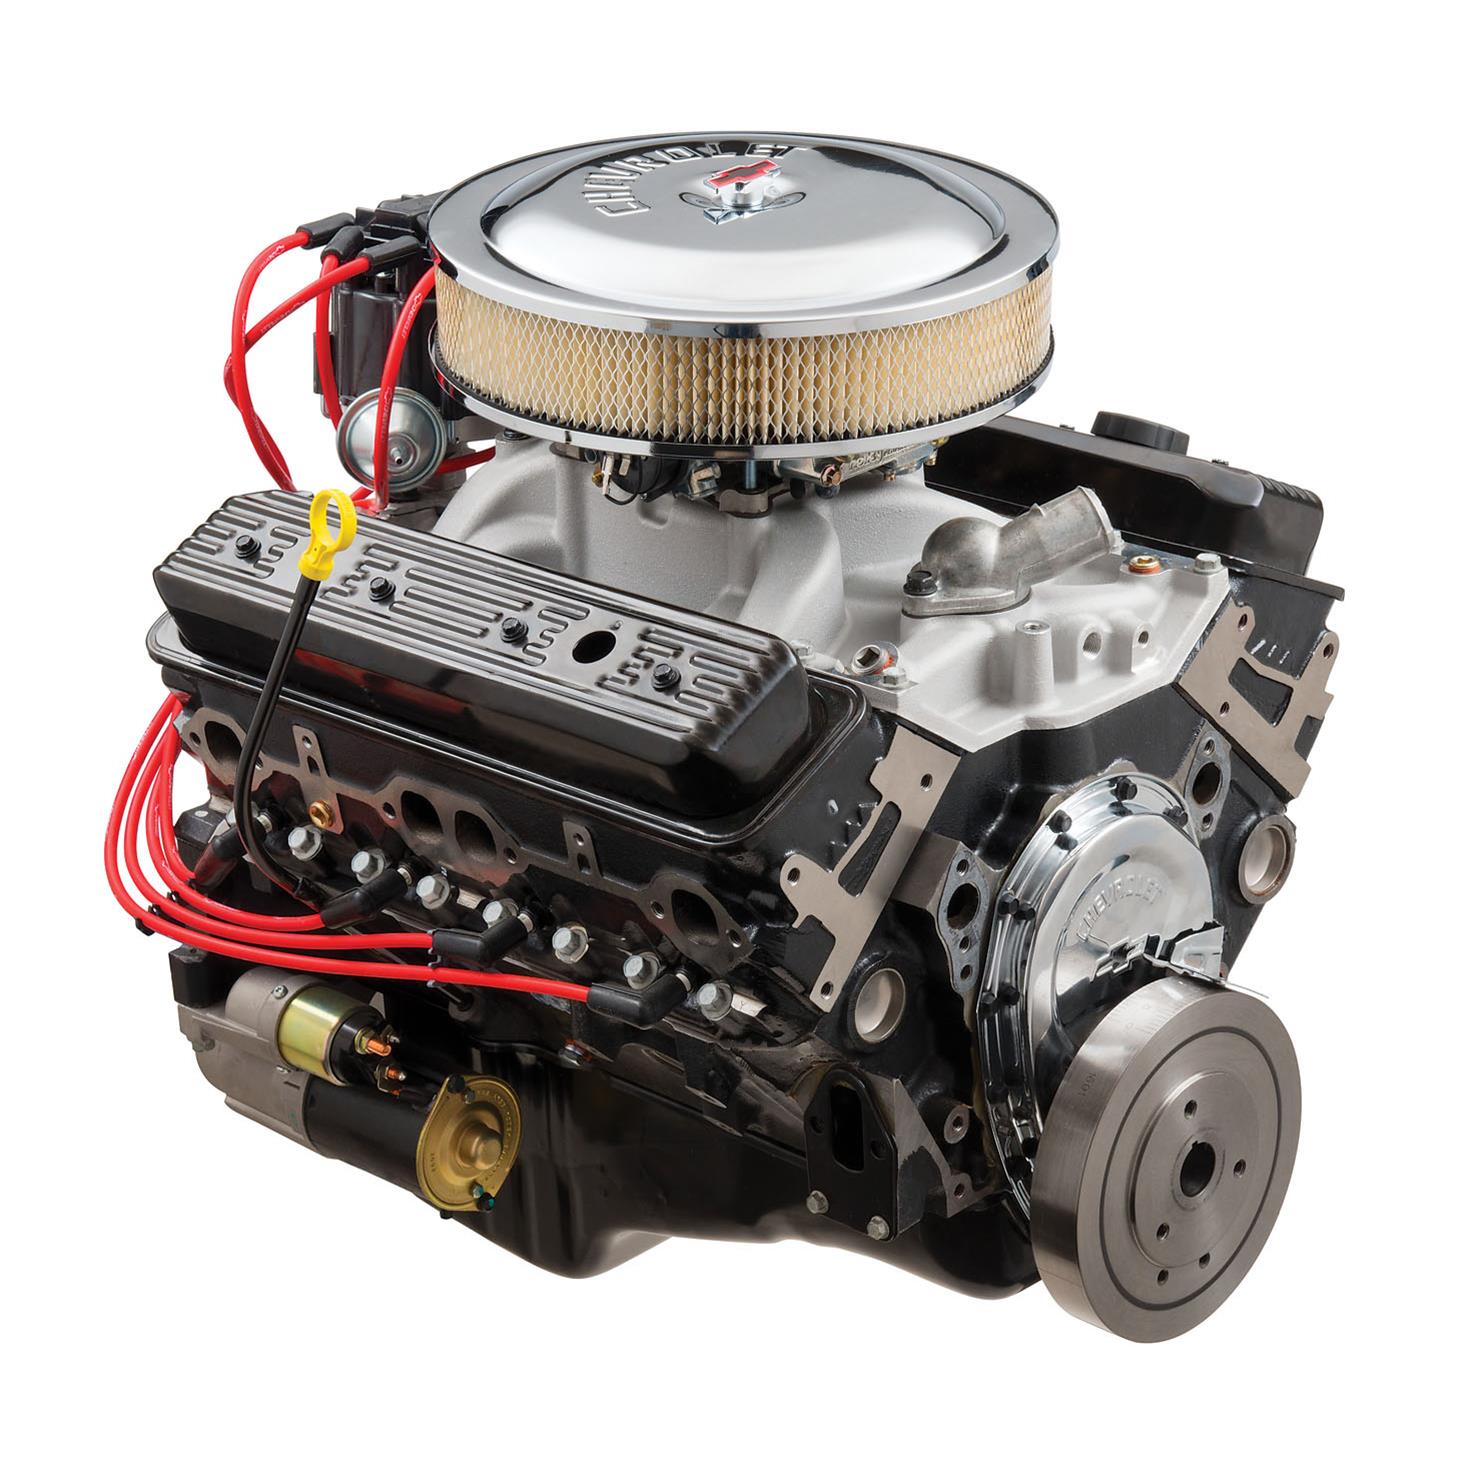 SP350/357 Deluxe Crate Engine 357 HP / 407 ft.-lbs. TQ